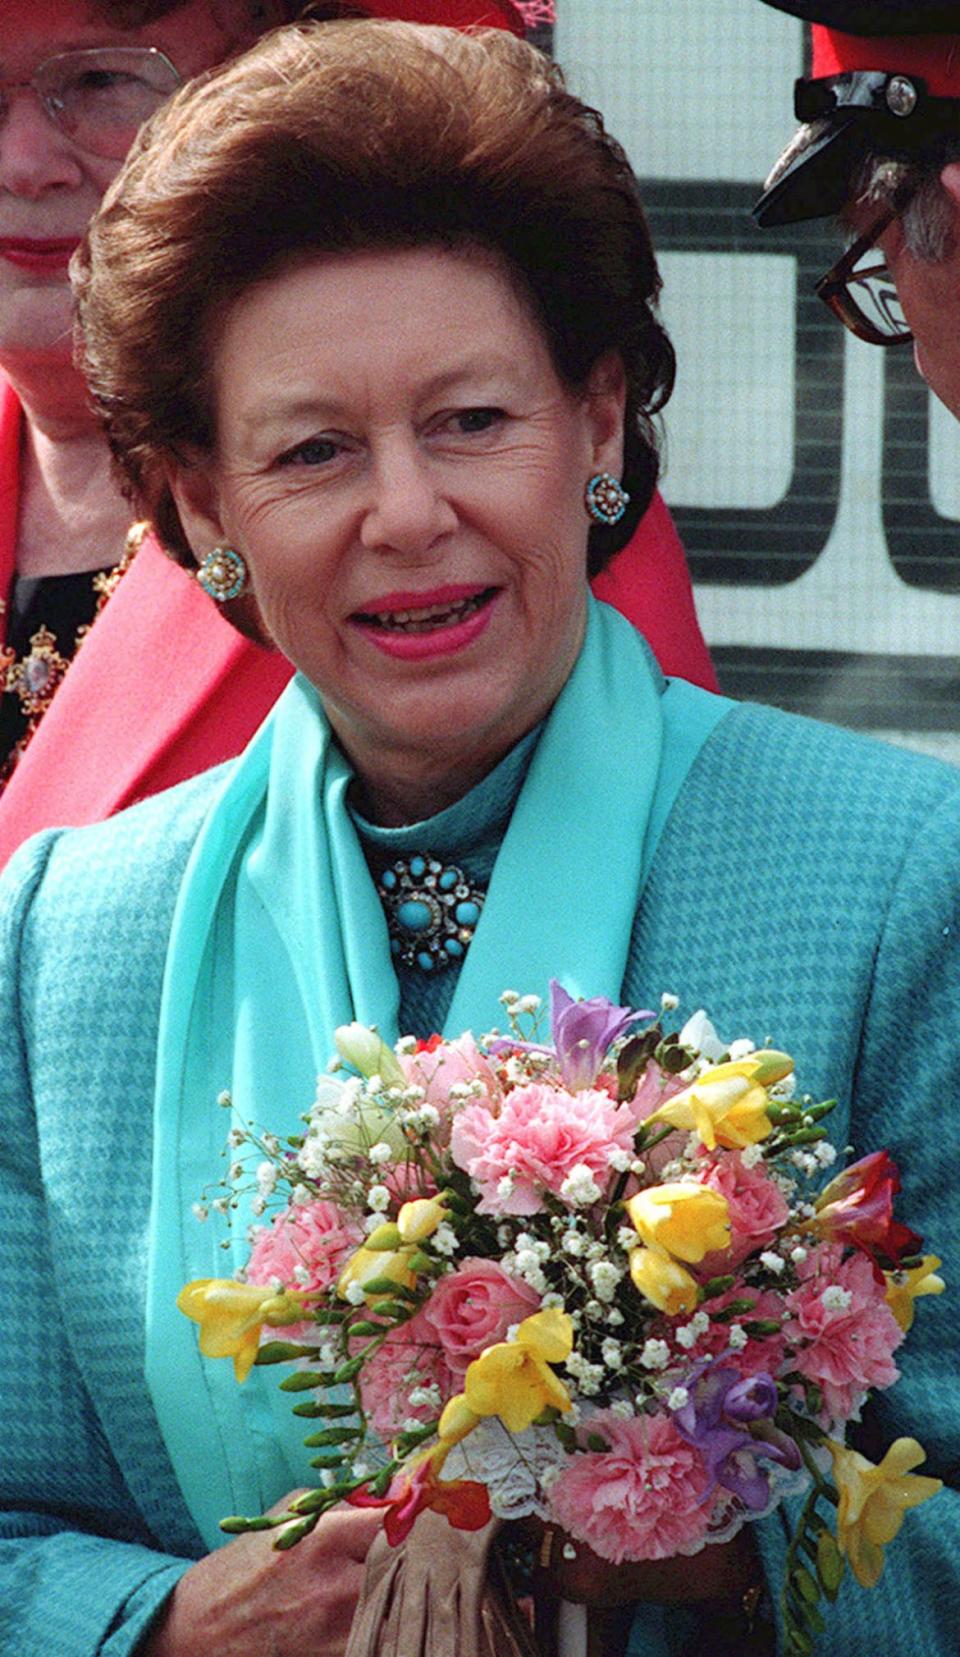 <div class="inline-image__caption"><p>Britain's Princess Margaret smiles as she leaves a youth centre in Manchester in April 1994.</p></div> <div class="inline-image__credit">REUTERS/Russell Boyce</div>